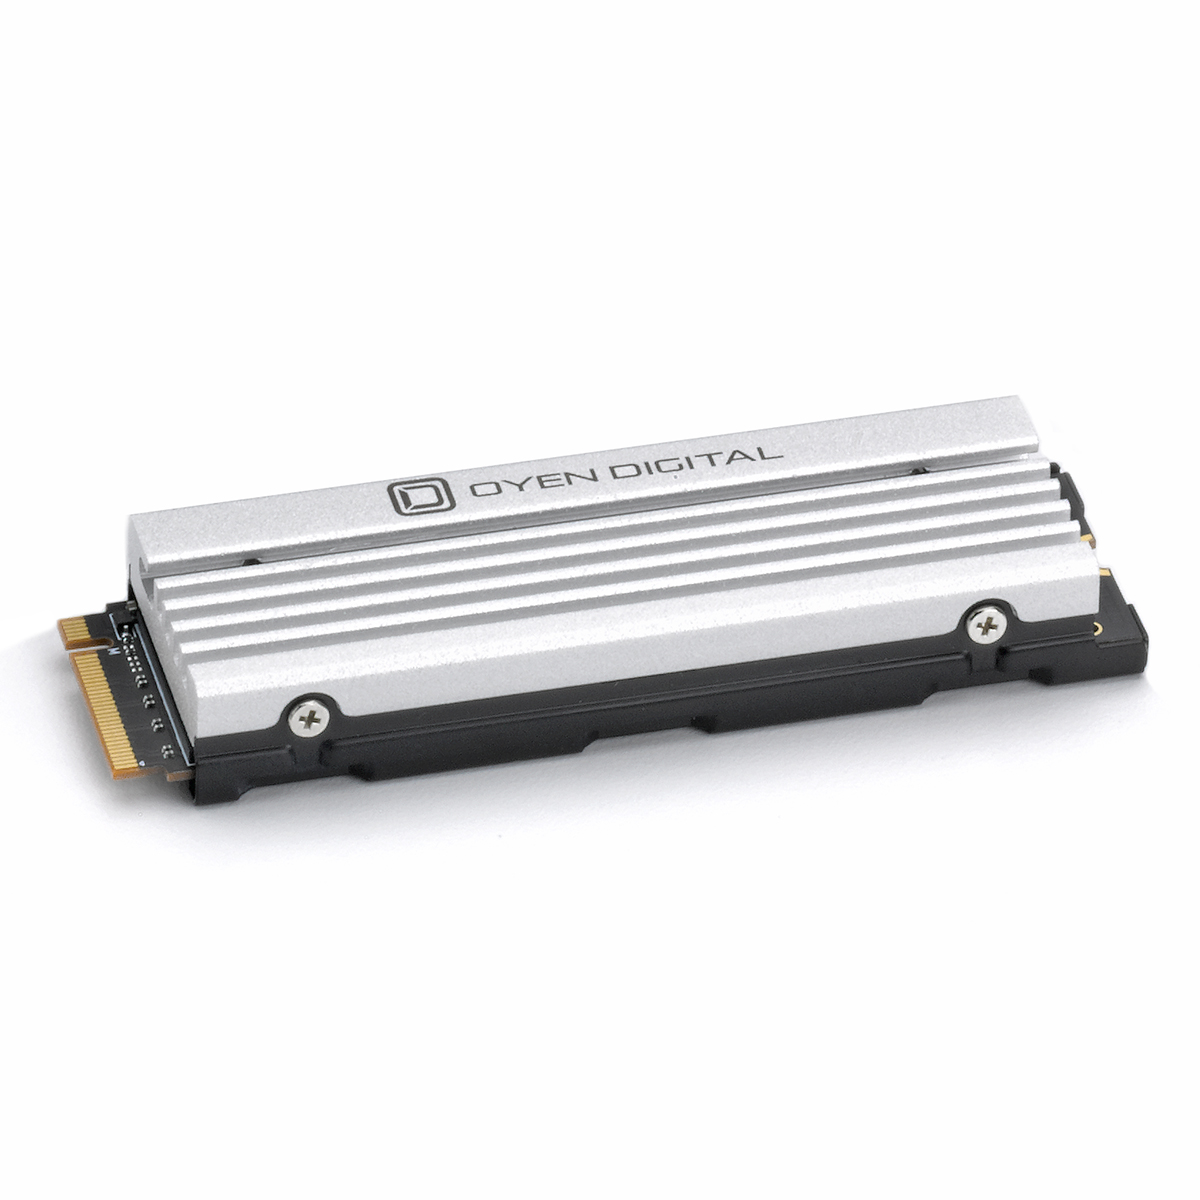 Dash Pro NVMe PCIe TLC NAND SSD with Heatsink, Compatible with Sony PS5 Internal M.2 Slot